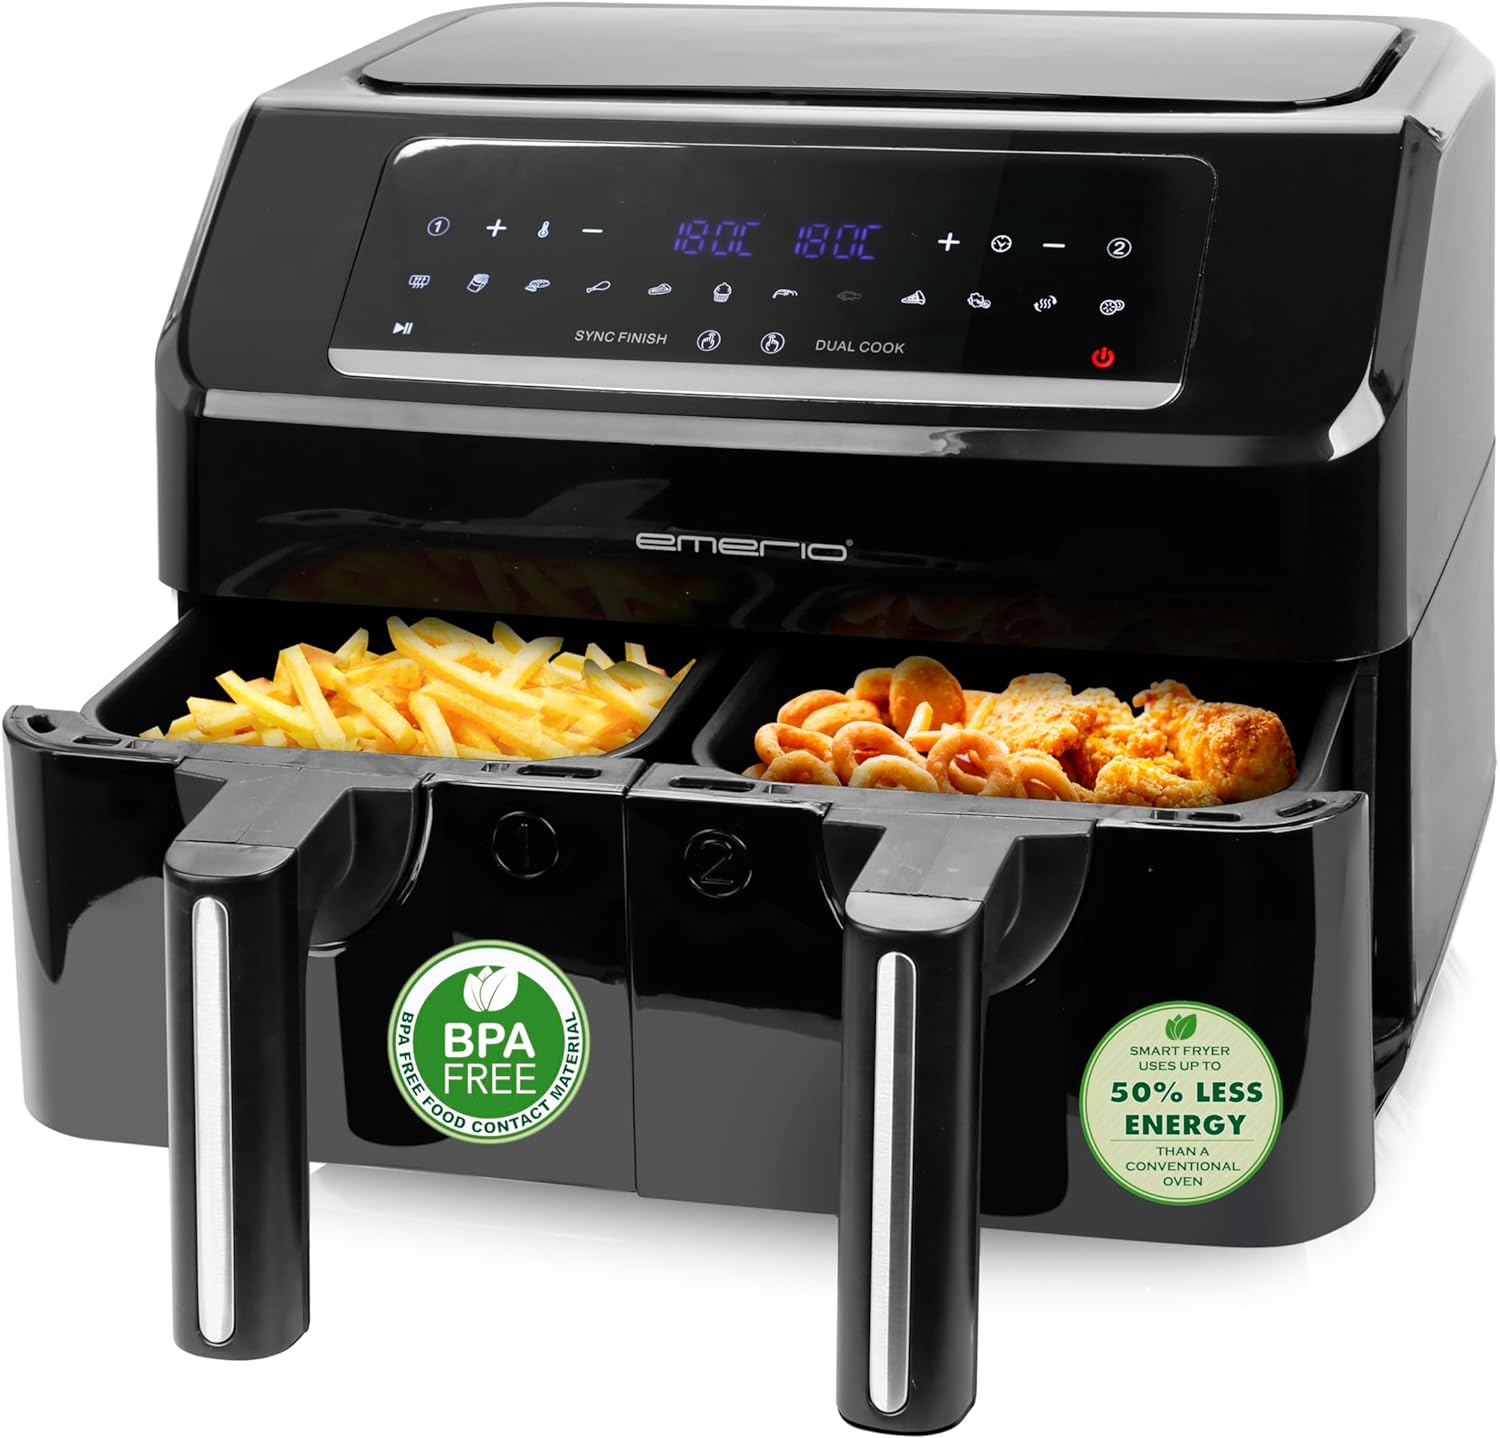 Emerio digital DOUBLE hot air fryer AirFryer Frying with hot air without additional oil 2x 3.6L volume 12 programs BPA free SYNC FINISH function (both finished at the same time) AF-130376.1